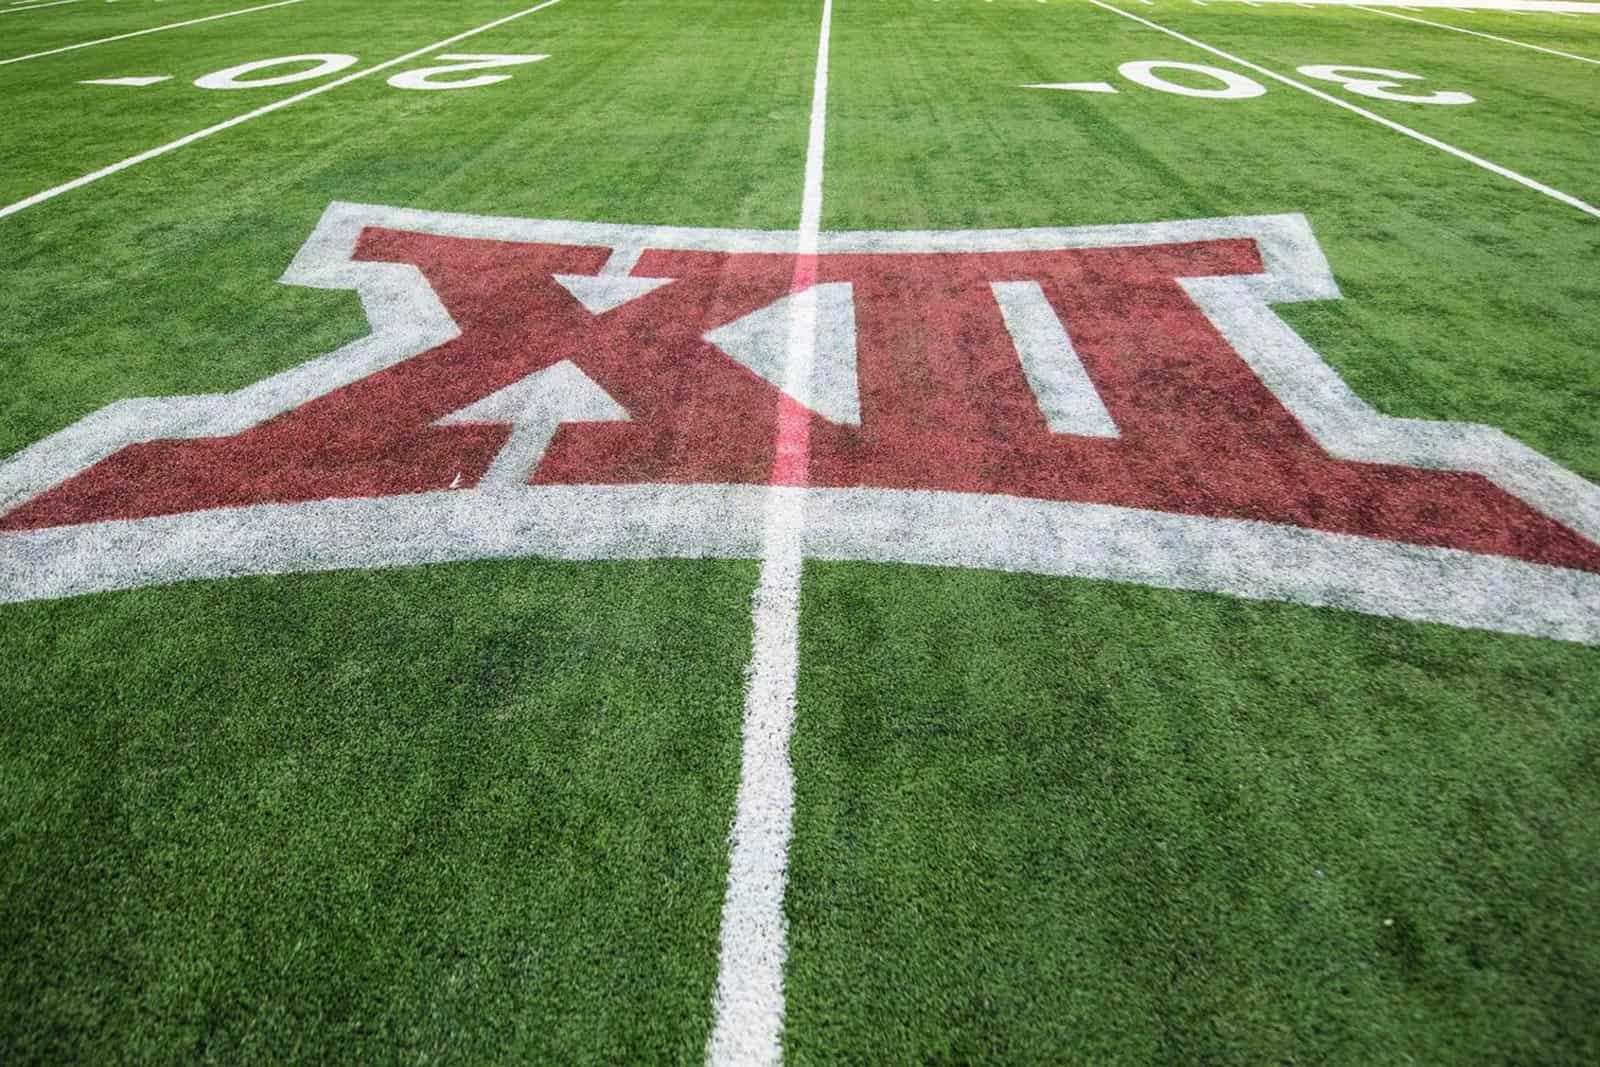 Big 12 releases revised 2020 football schedule